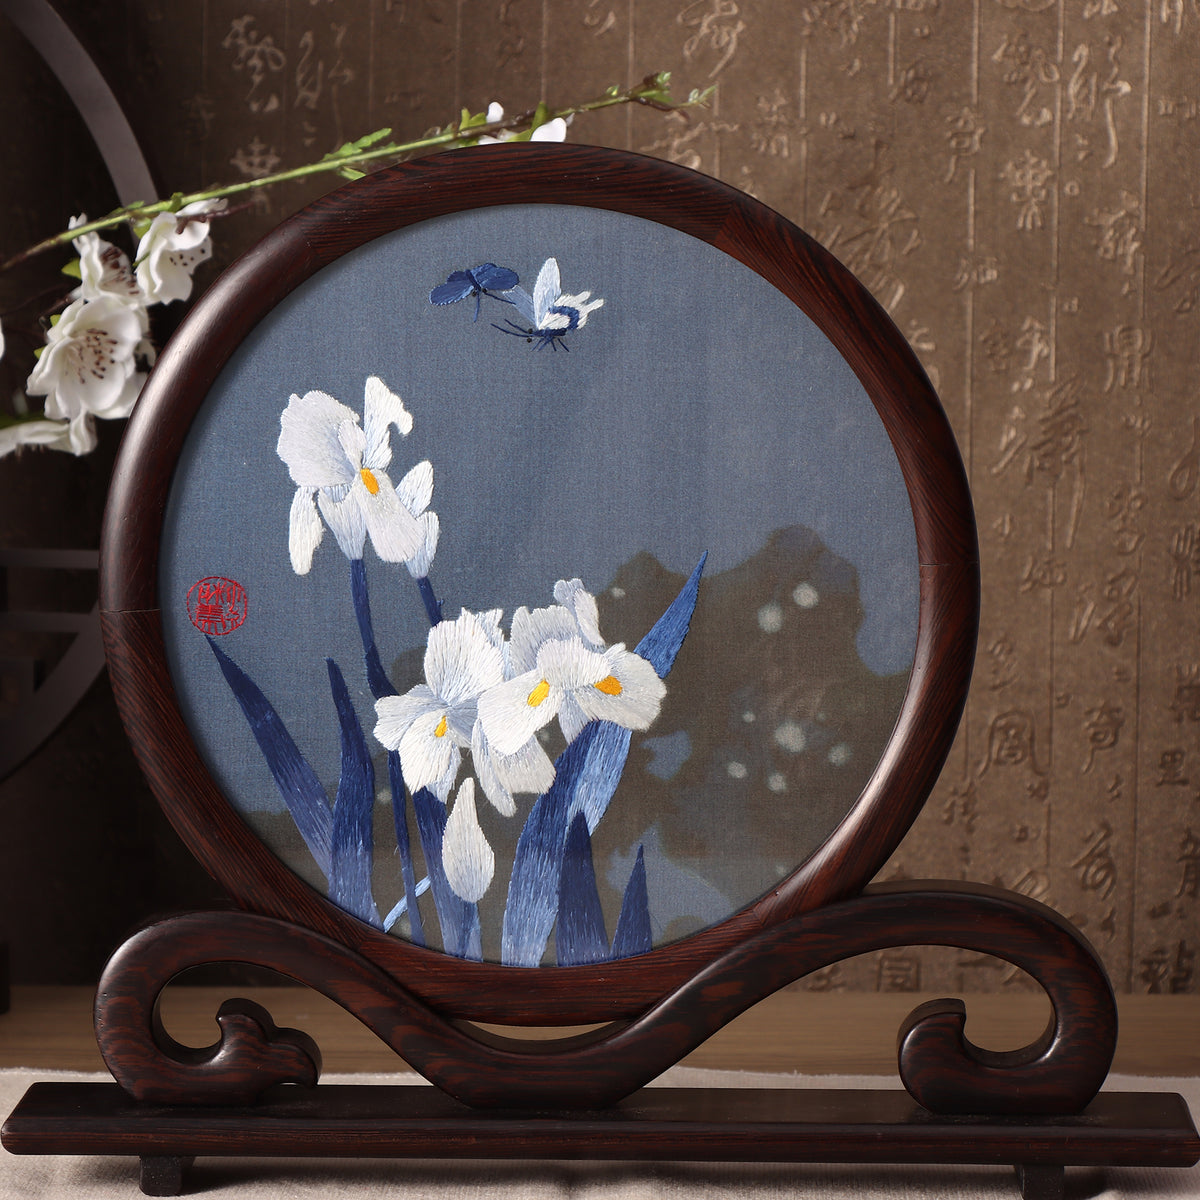 Hunan Embroidery with Stand 【lris】 Ruyi frame-For HomeDecoration